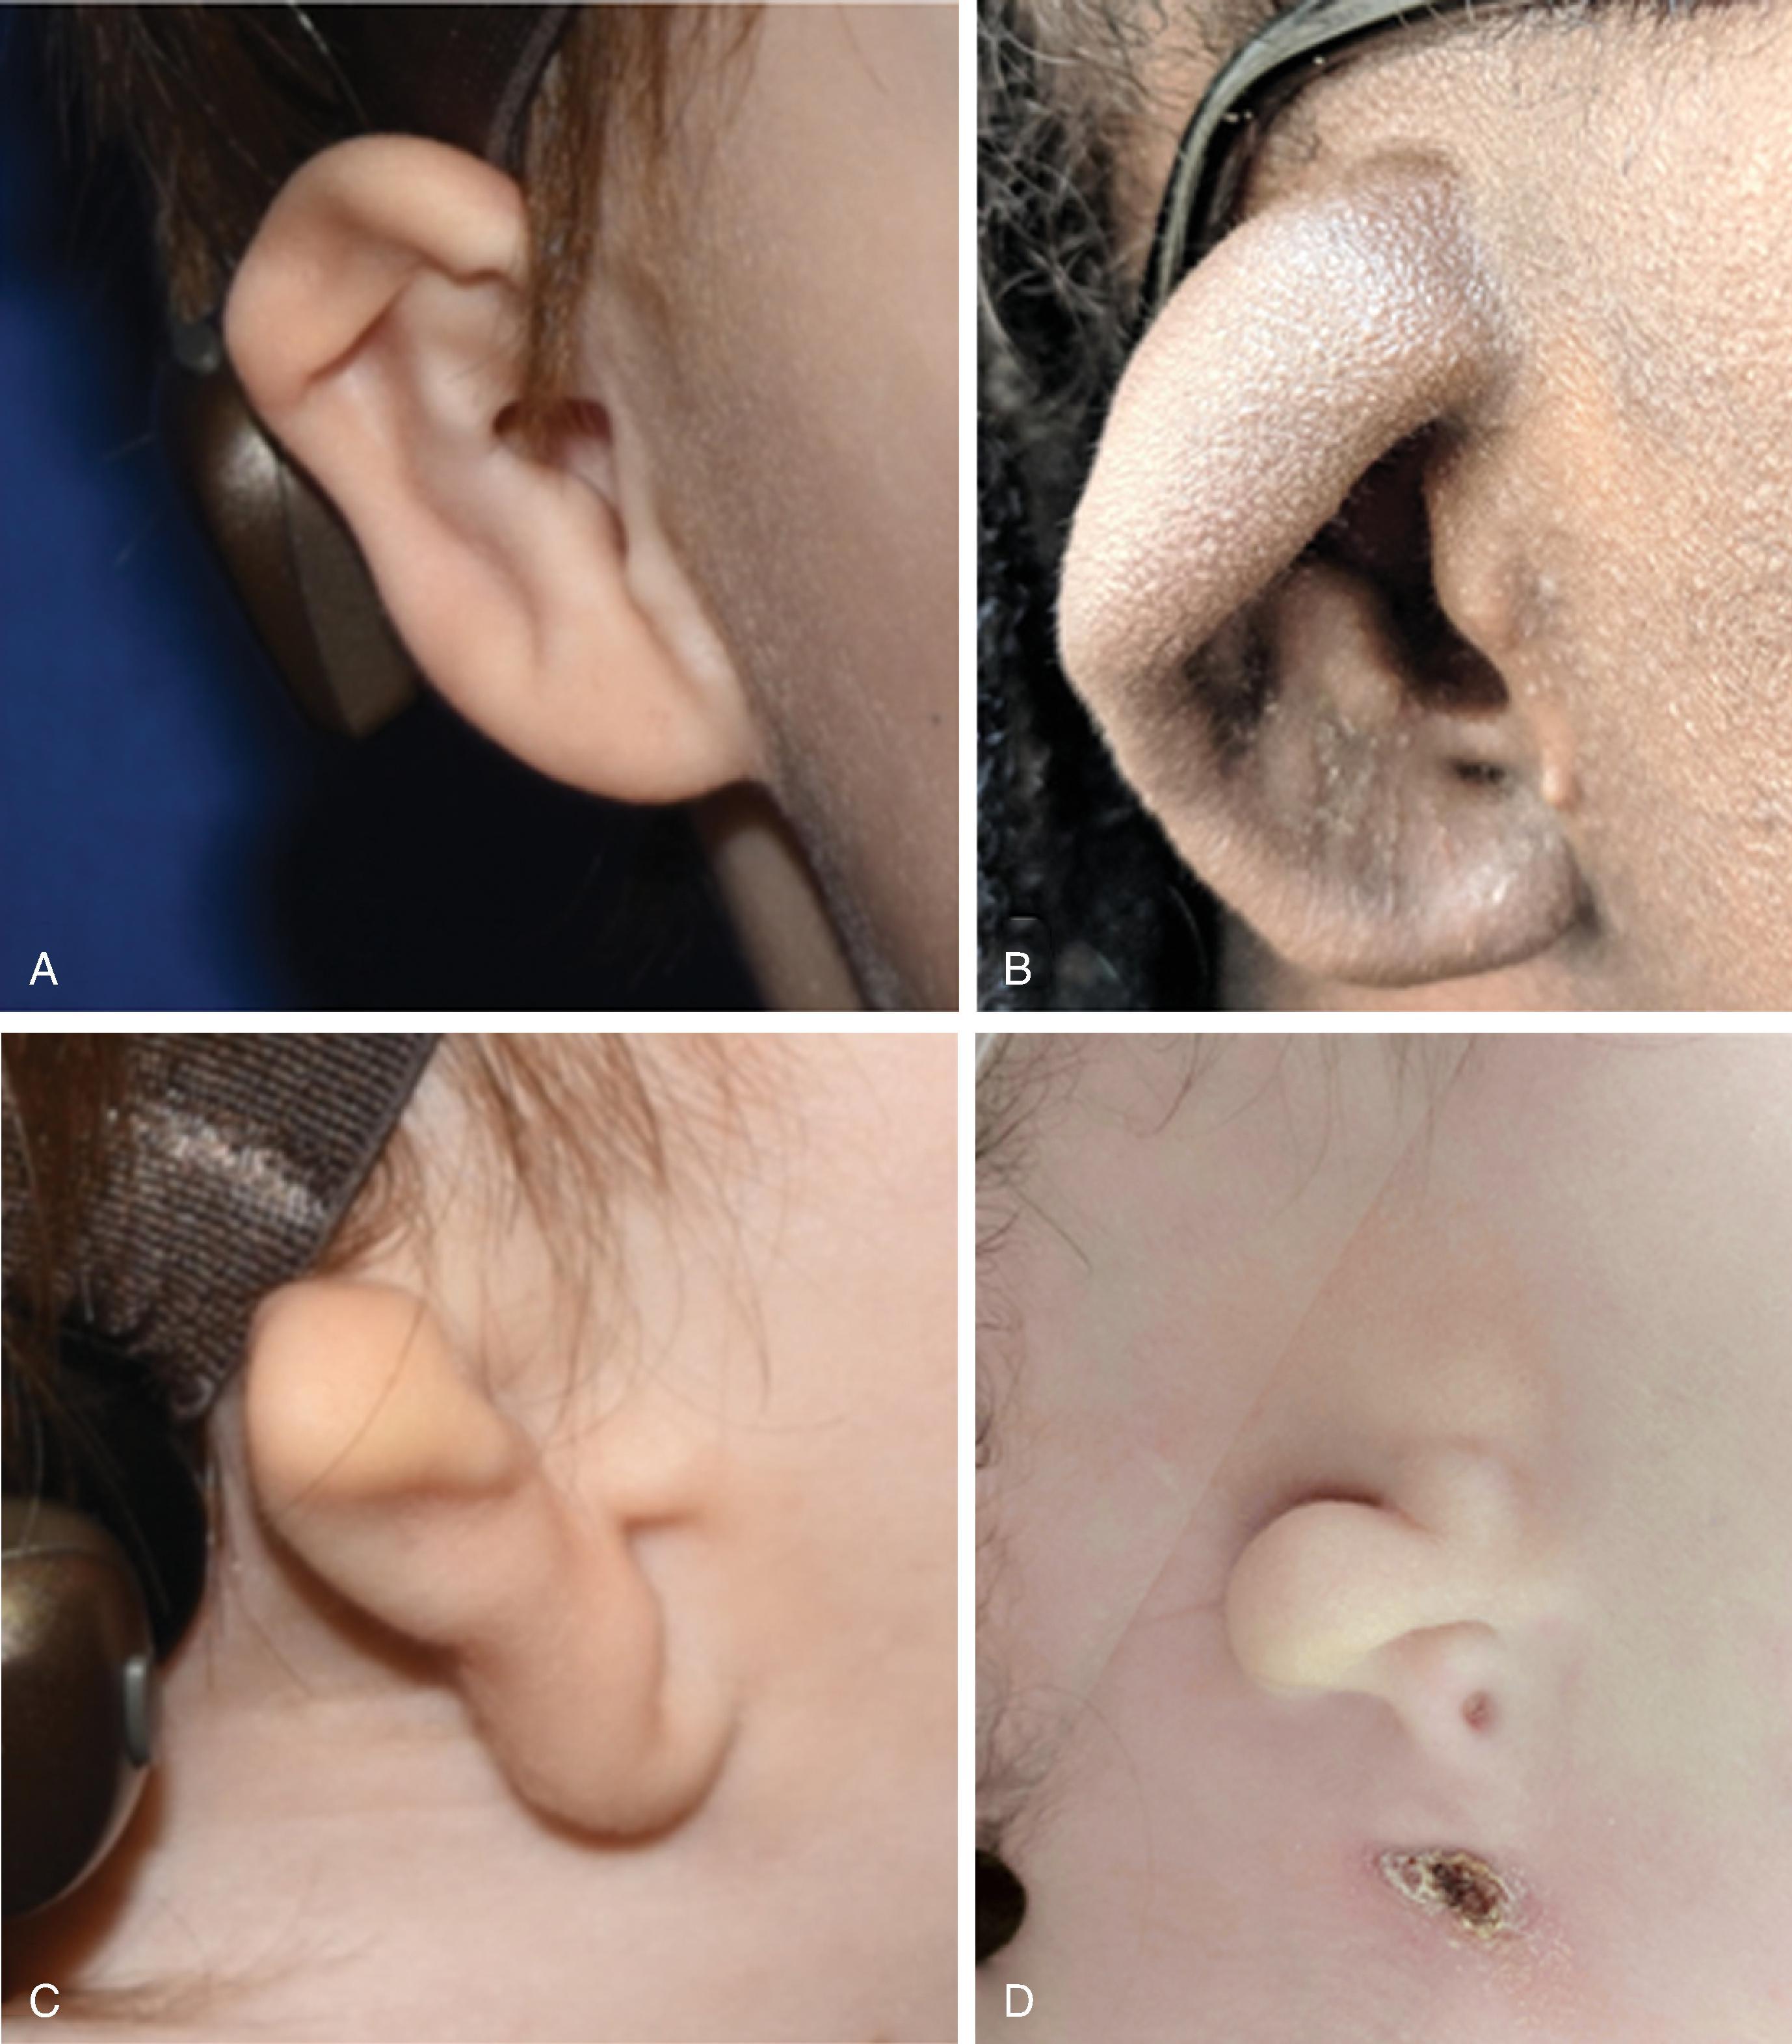 FIG. 23.3, Microtia Grades I to IV. A , In Grade I microtia, all of the auricular subunits are present but with some atypia. B , In Grade II, or conchal type microtia, the inferior aspect of the auricle is intact, notably the tragus/antitragus/intertragal incisor, and deformity is primarily confined to the superior half of the ear. C , Grade III, or lobular type microtia, has a preserved lobule often with a small residual remnant cartilaginous structure. D , Grade IV microtia, or anotia, has very little or no structure present. Of note, in this patient there is a first branchial cleft tract. Bone conduction devices are seen on the patients shown in A and C . Such devices are strongly recommended beginning at 6 to 9 months of age to promote binaural hearing.